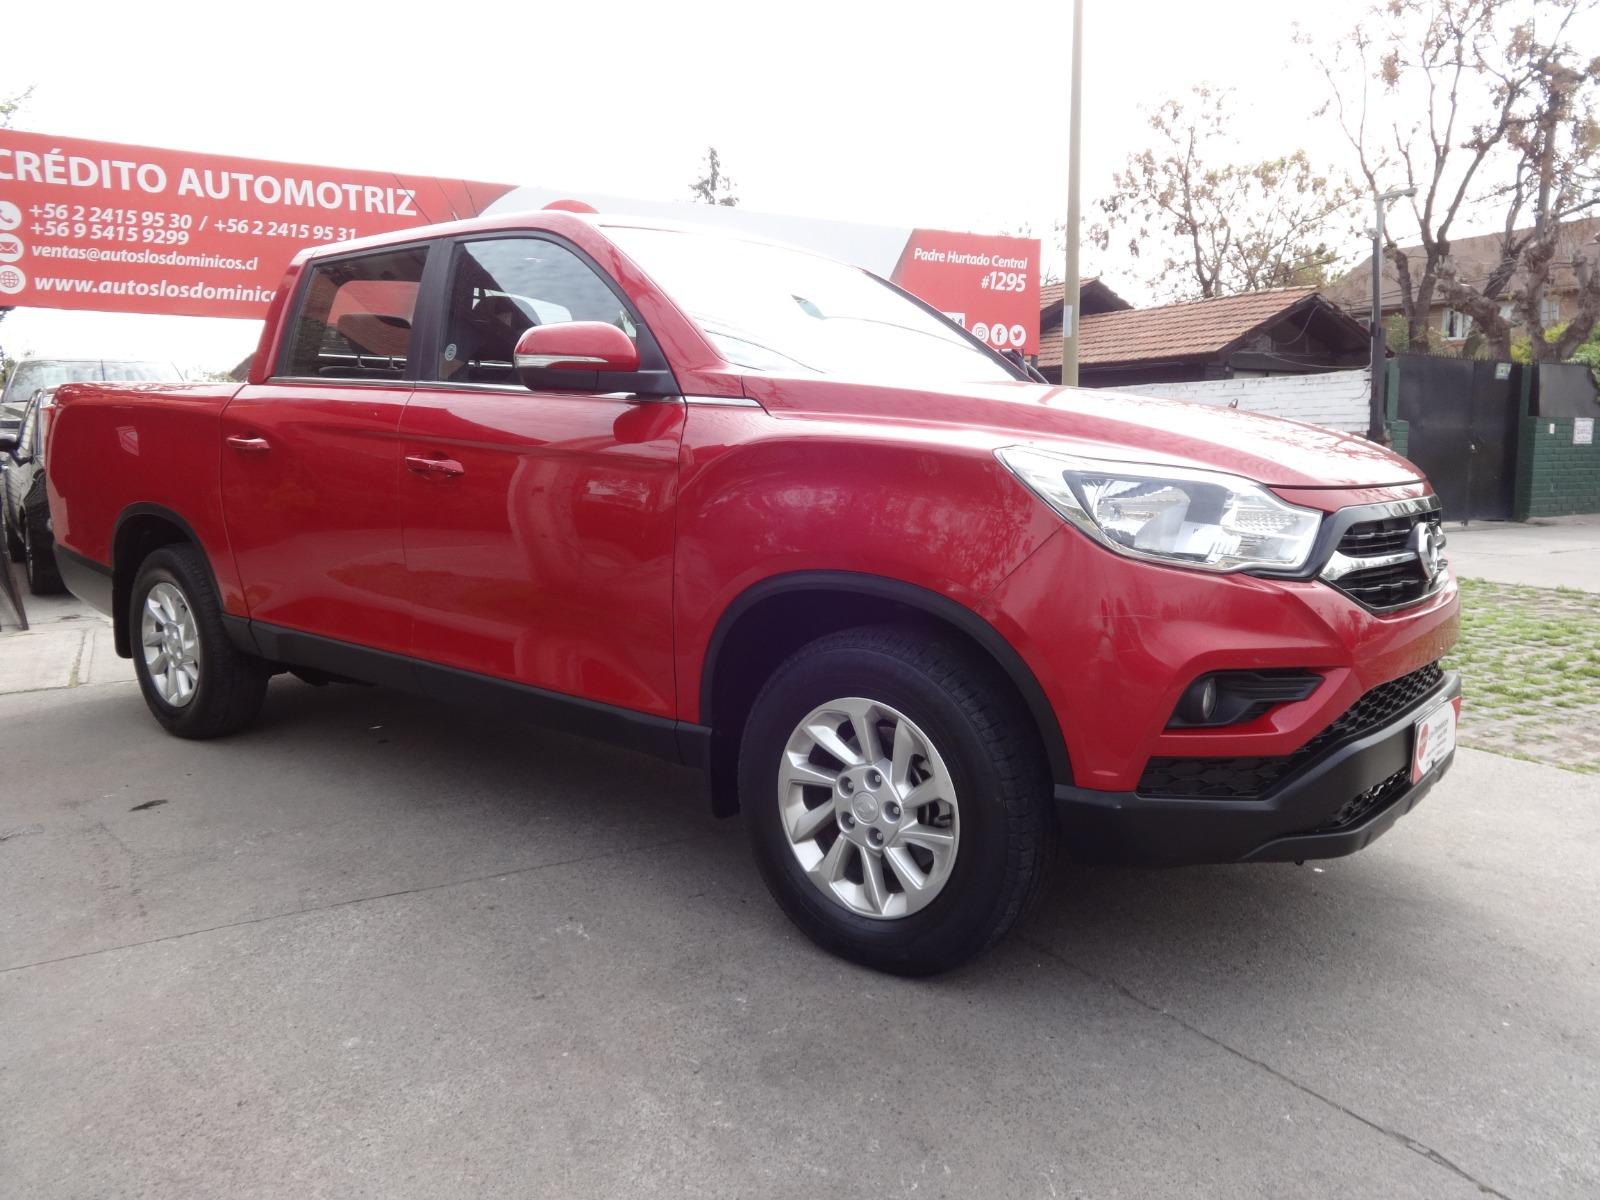 SSANGYONG MUSSO GRAND DIESEL 2.2 MEC 6 VEL 4X4 2022 SOLO 55.000 KM  - 